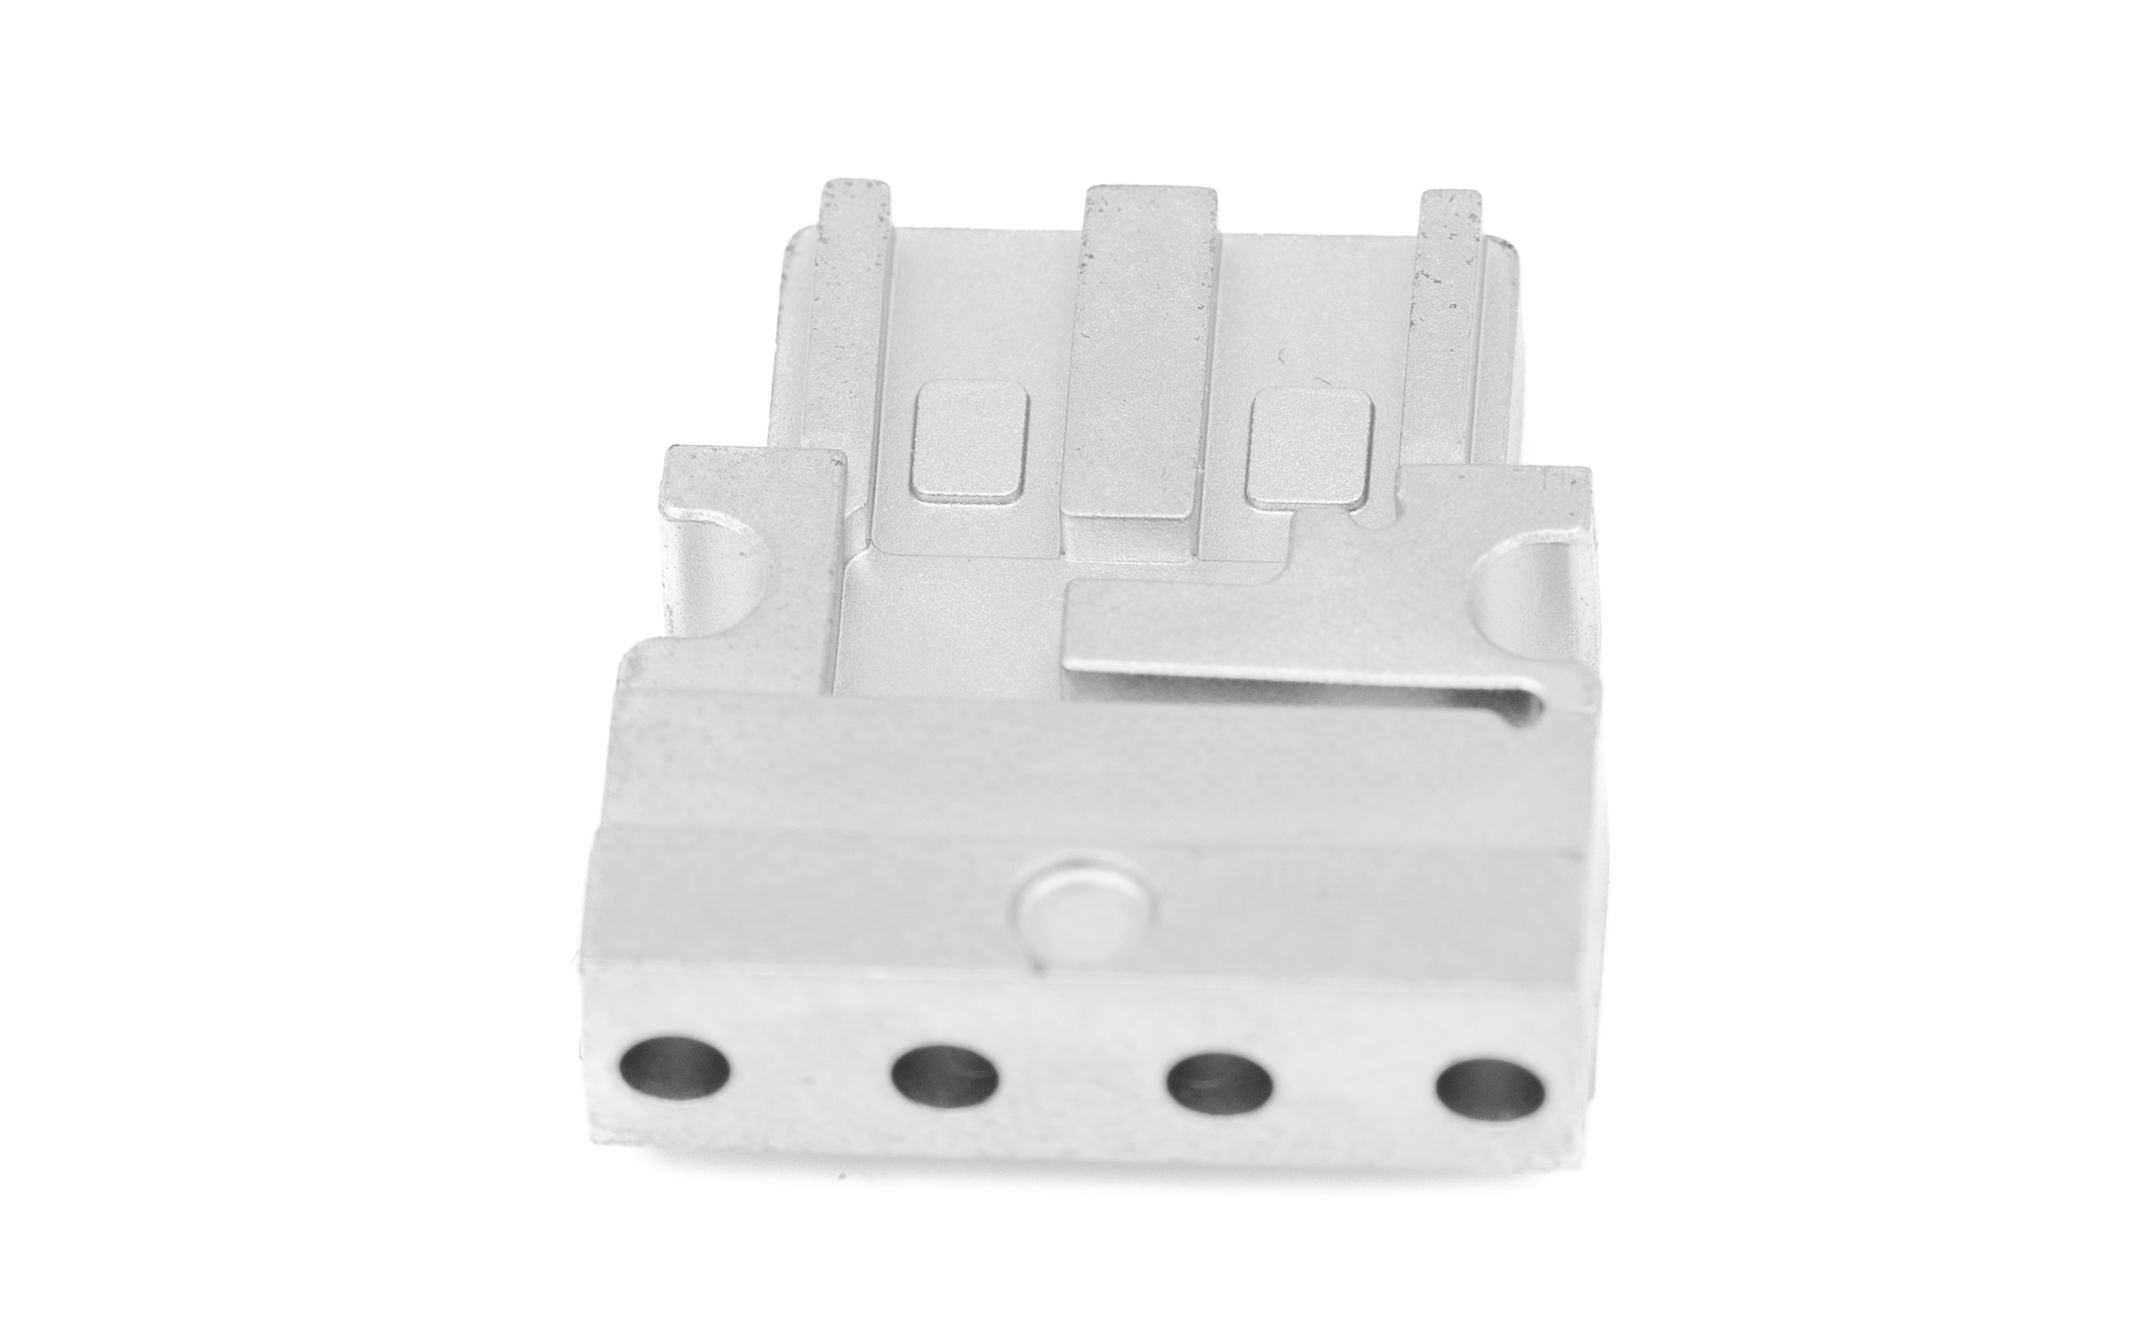 Electronic connector sockets